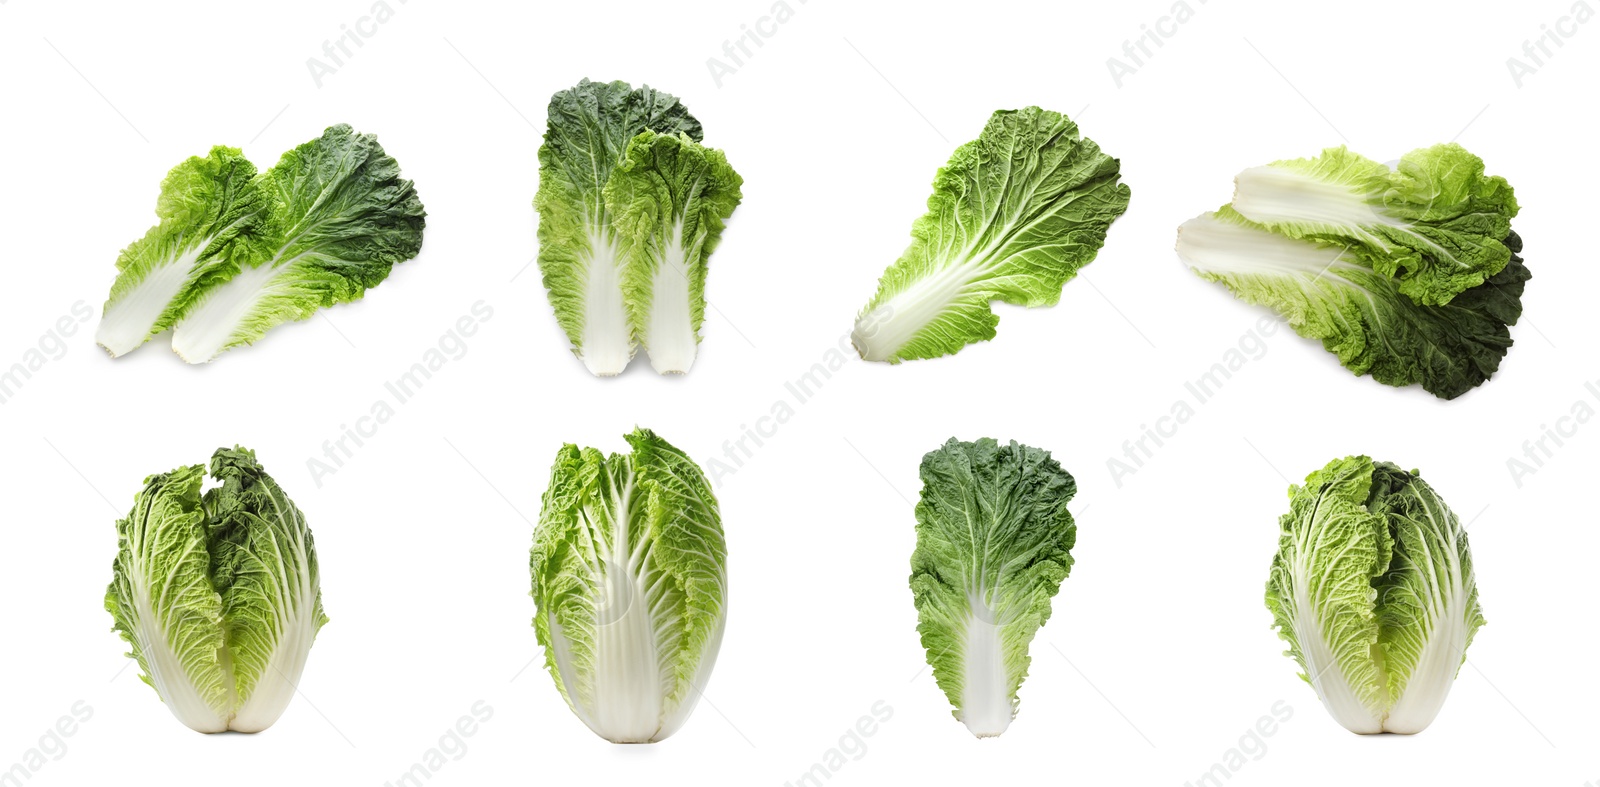 Image of Collage with fresh Chinese cabbages and leaves on white background